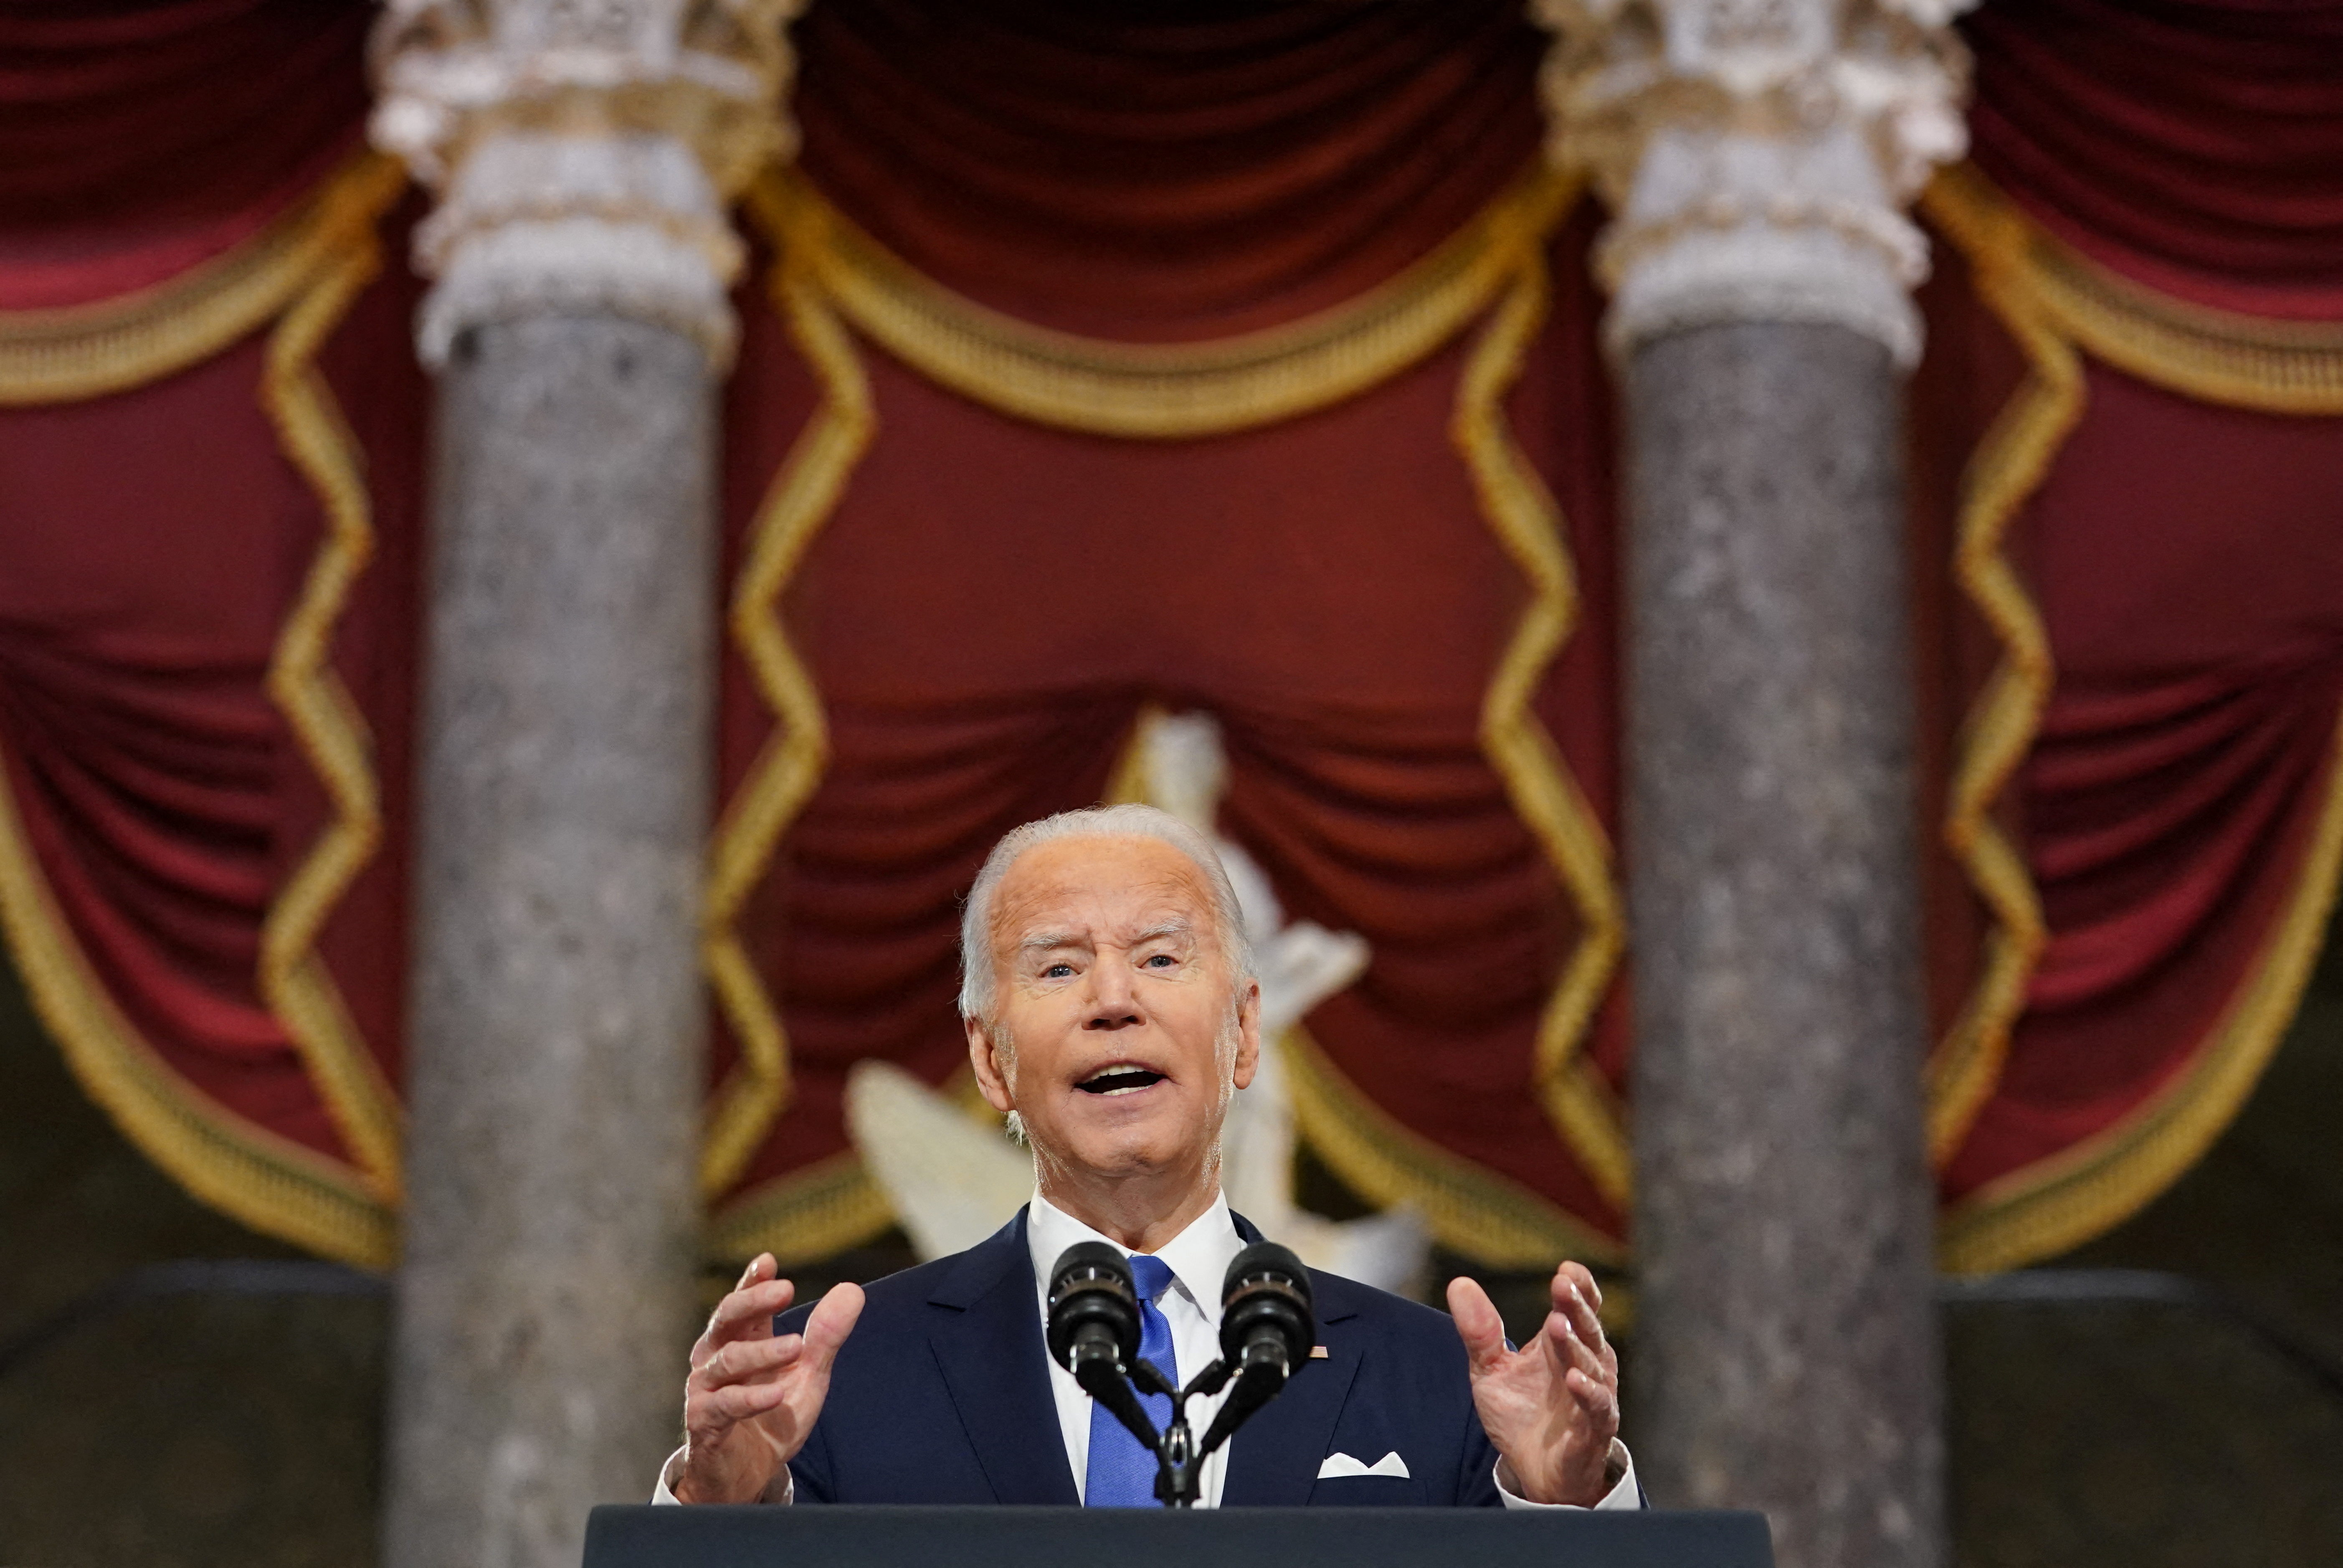 U.S. President Joe Biden speaks in Statuary Hall on the first anniversary of the January 6, 2021 attack on the U.S. Capitol by supporters of former President Donald Trump, on Capitol Hill in Washington, U.S., January 6, 2022. REUTERS/Kevin Lamarque